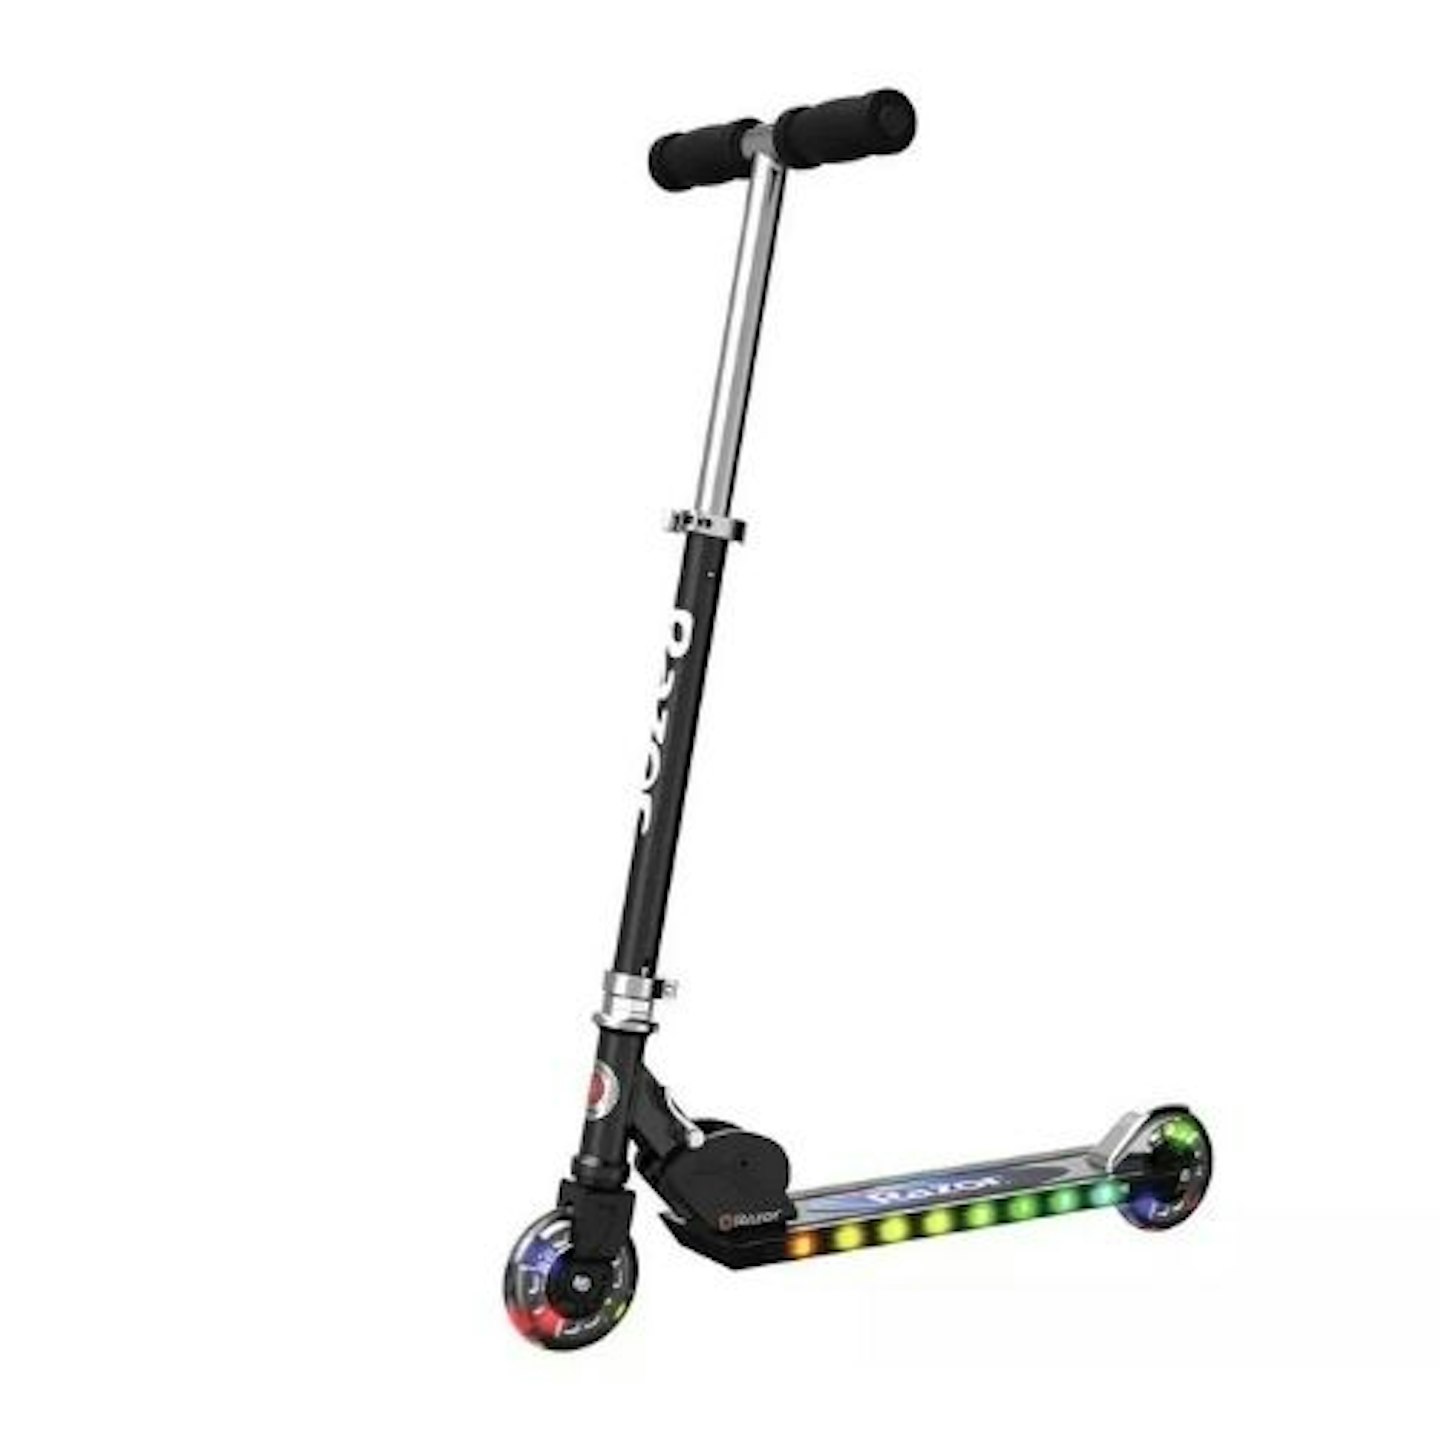 Top Christmas Toys: Razor A+ Lightshow Folding Light Up Scooter